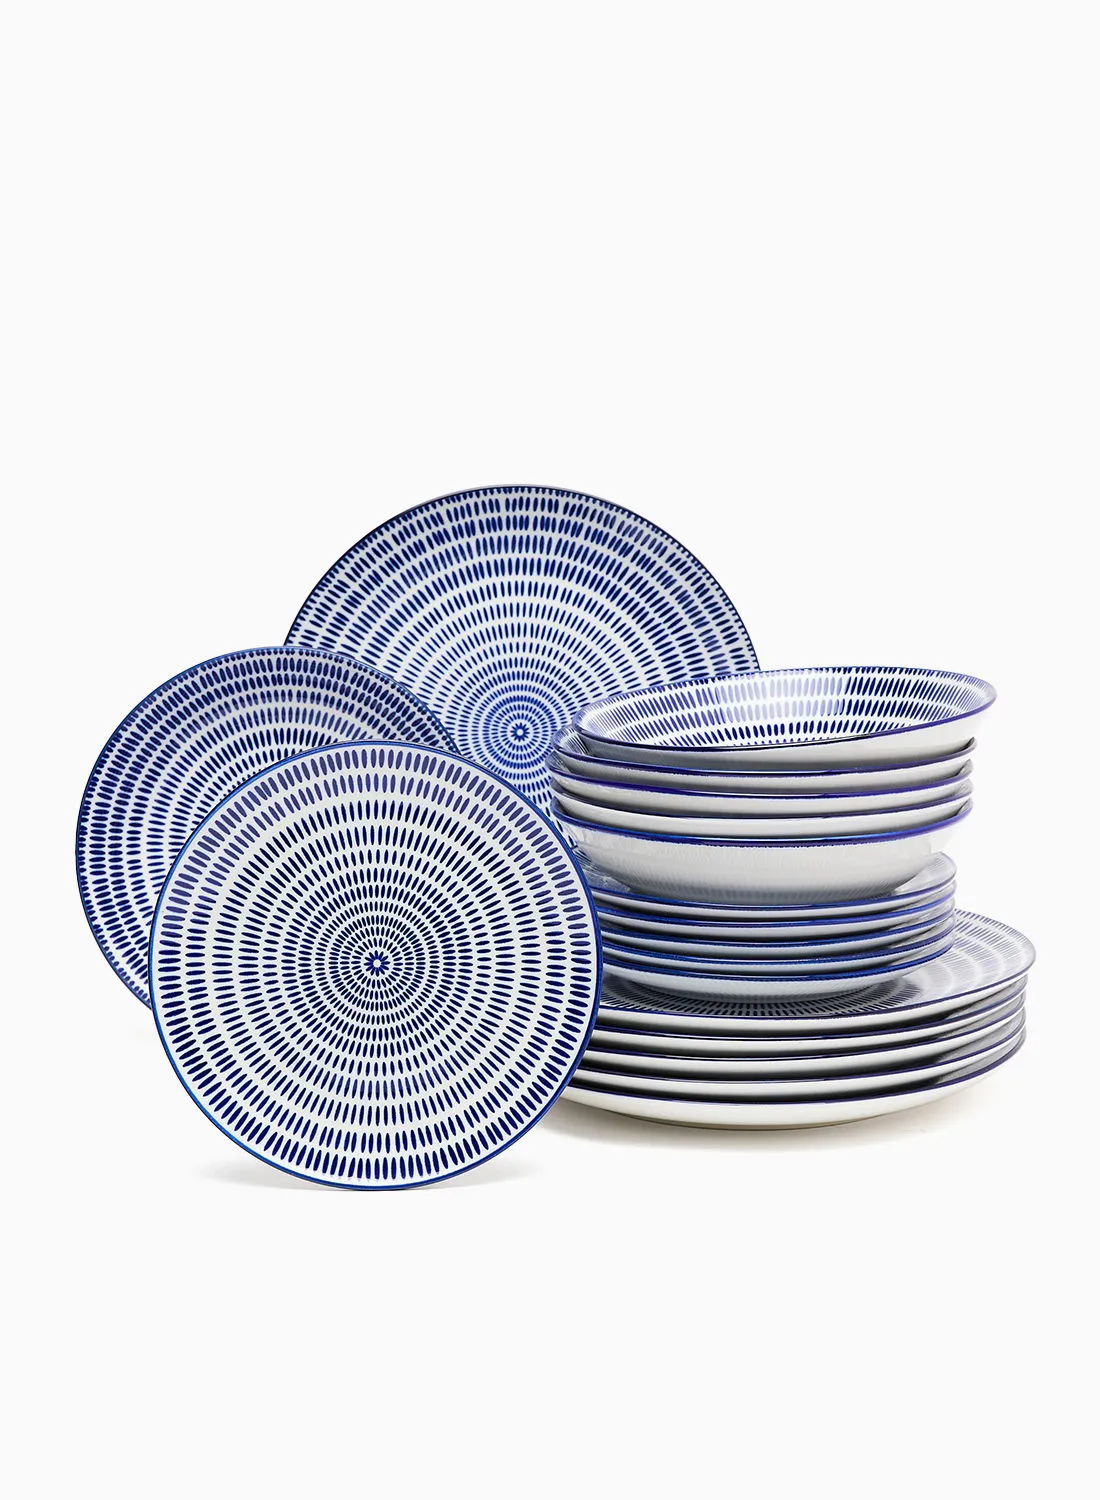 noon east 18 Piece Porcelain Dinner Set - Dishes, Plates - Dinner Plate, Side Plate, Bowl - Serves 6 - Printed Design Pacific